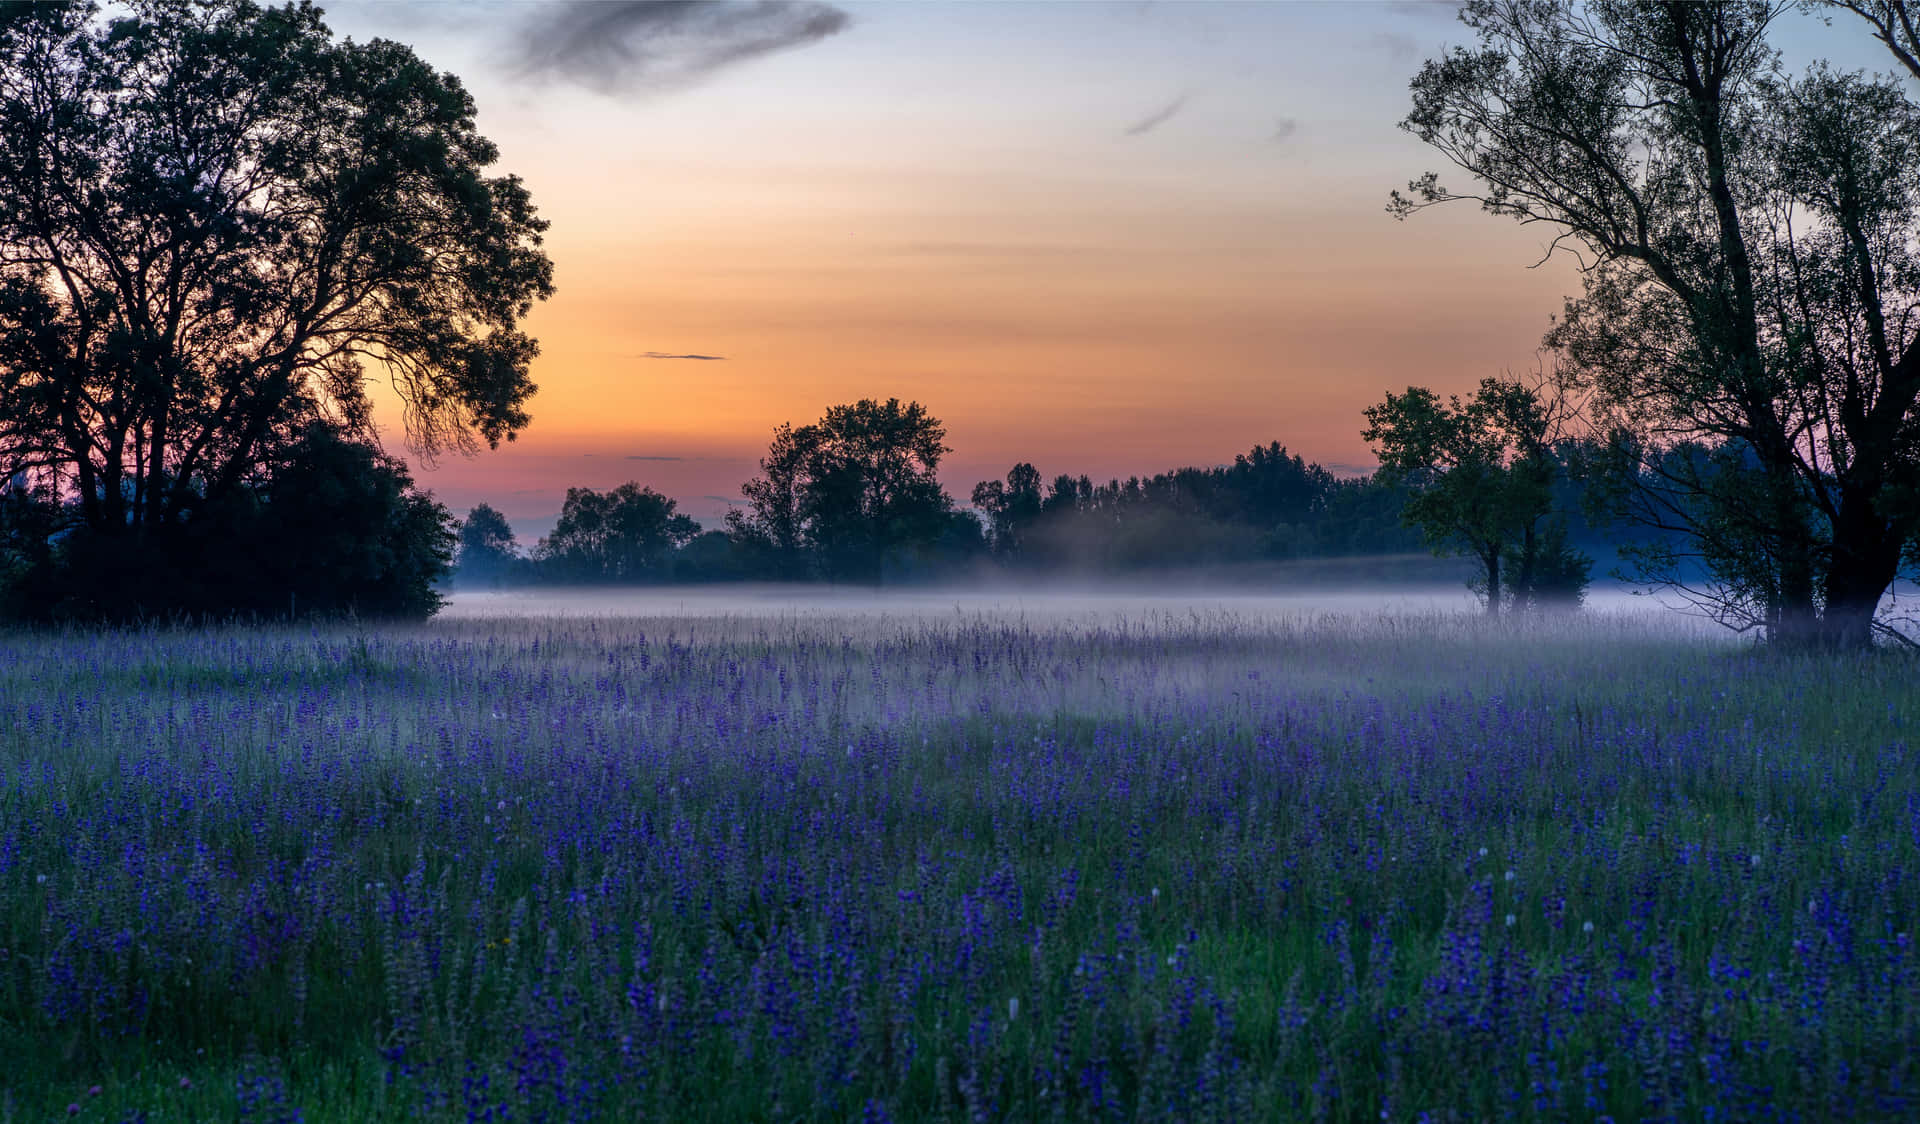 A Field With Purple Flowers And Trees At Sunset Wallpaper